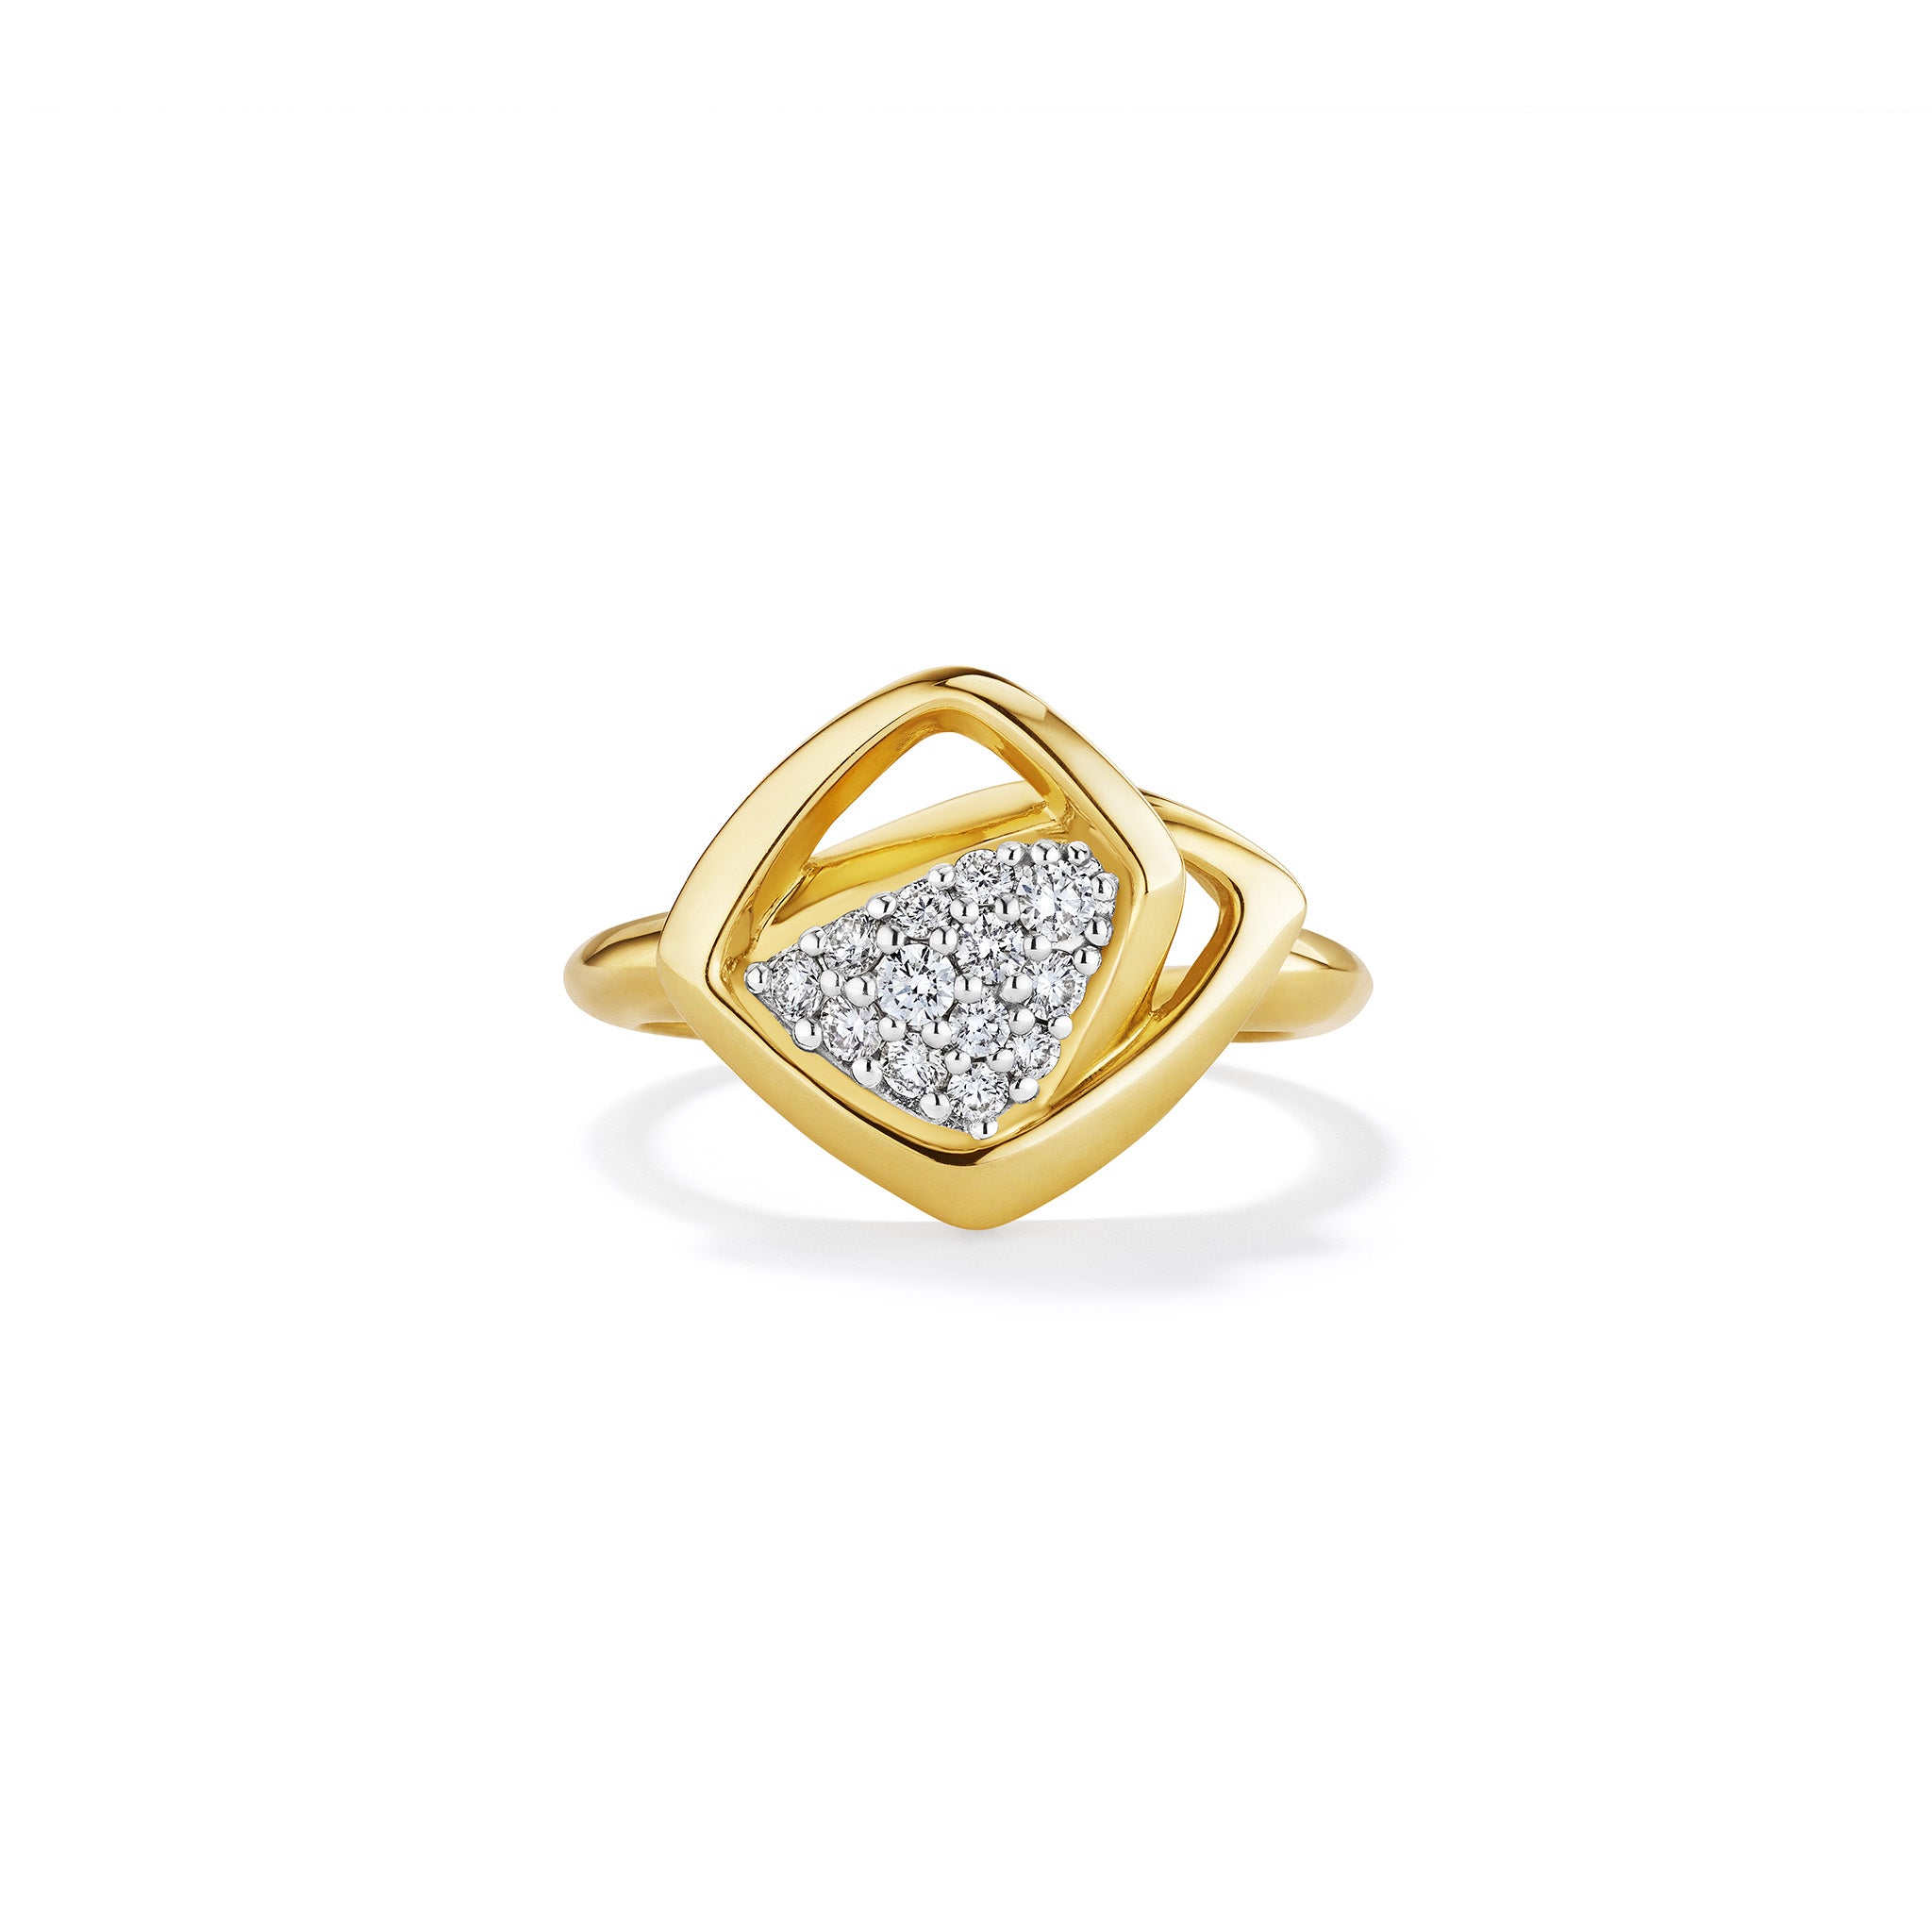 Selvaggia Ring With Diamonds In 14K